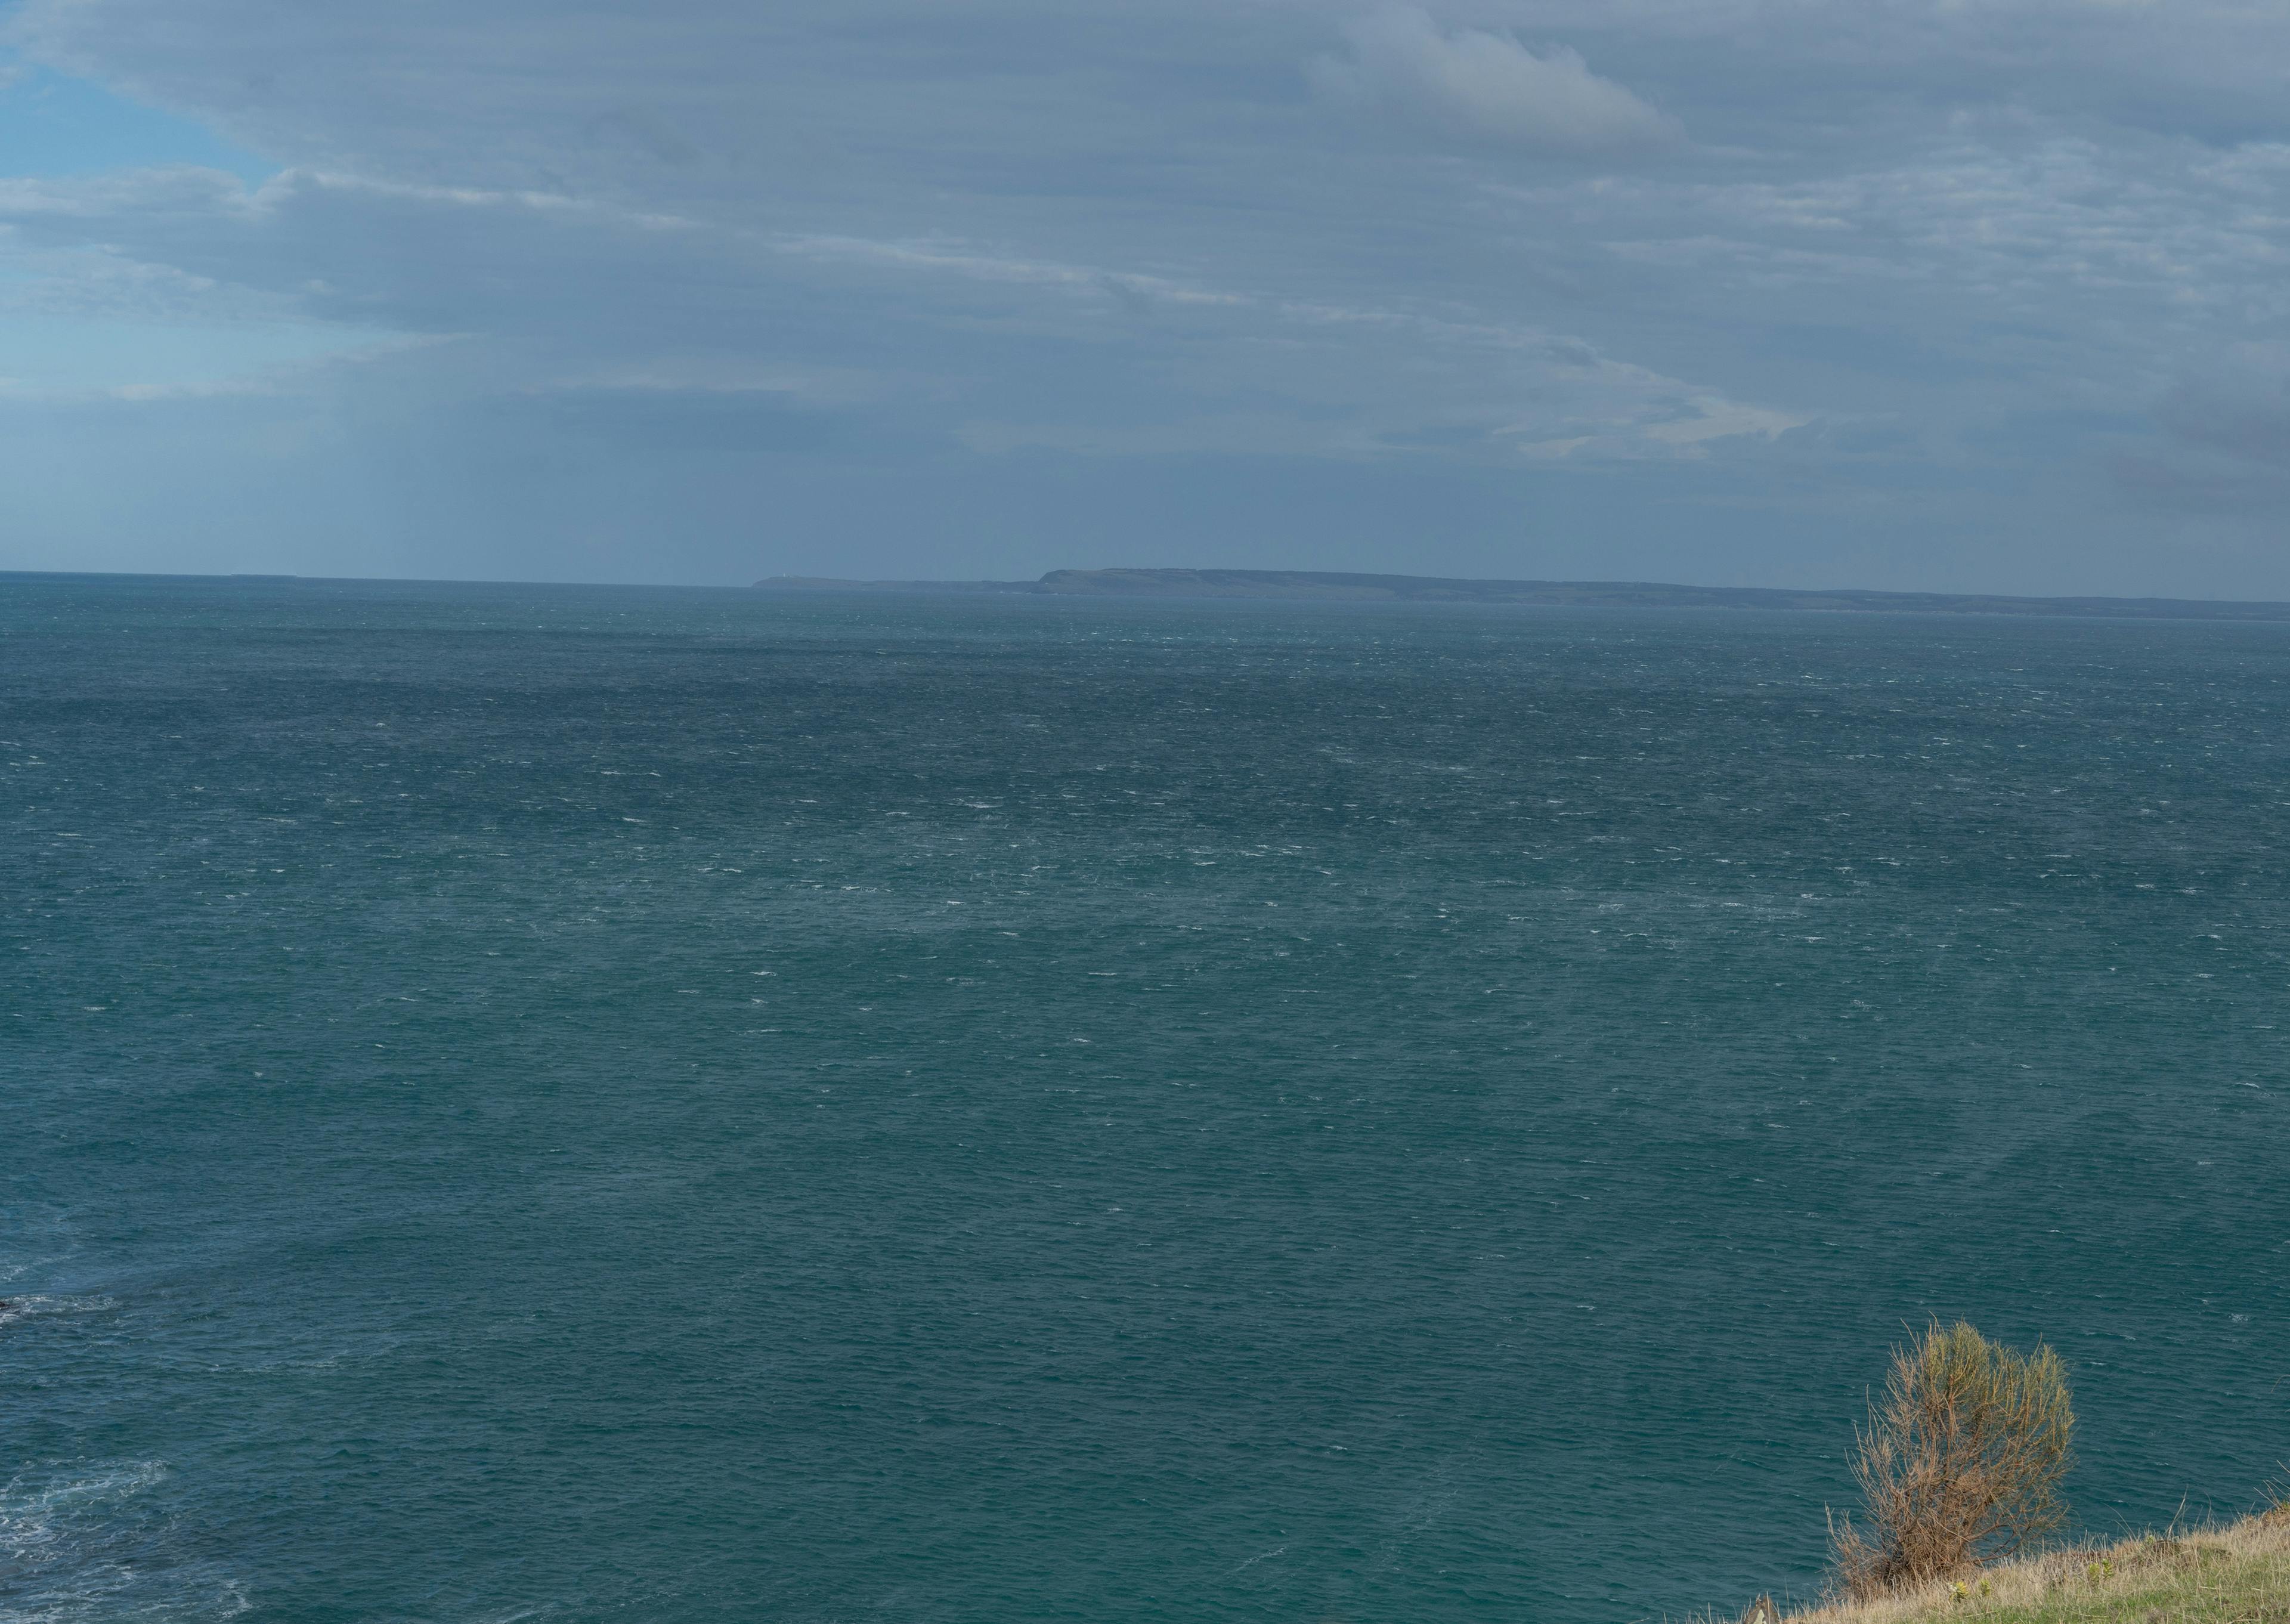 Strong winds with Kangaroo Island just visible 